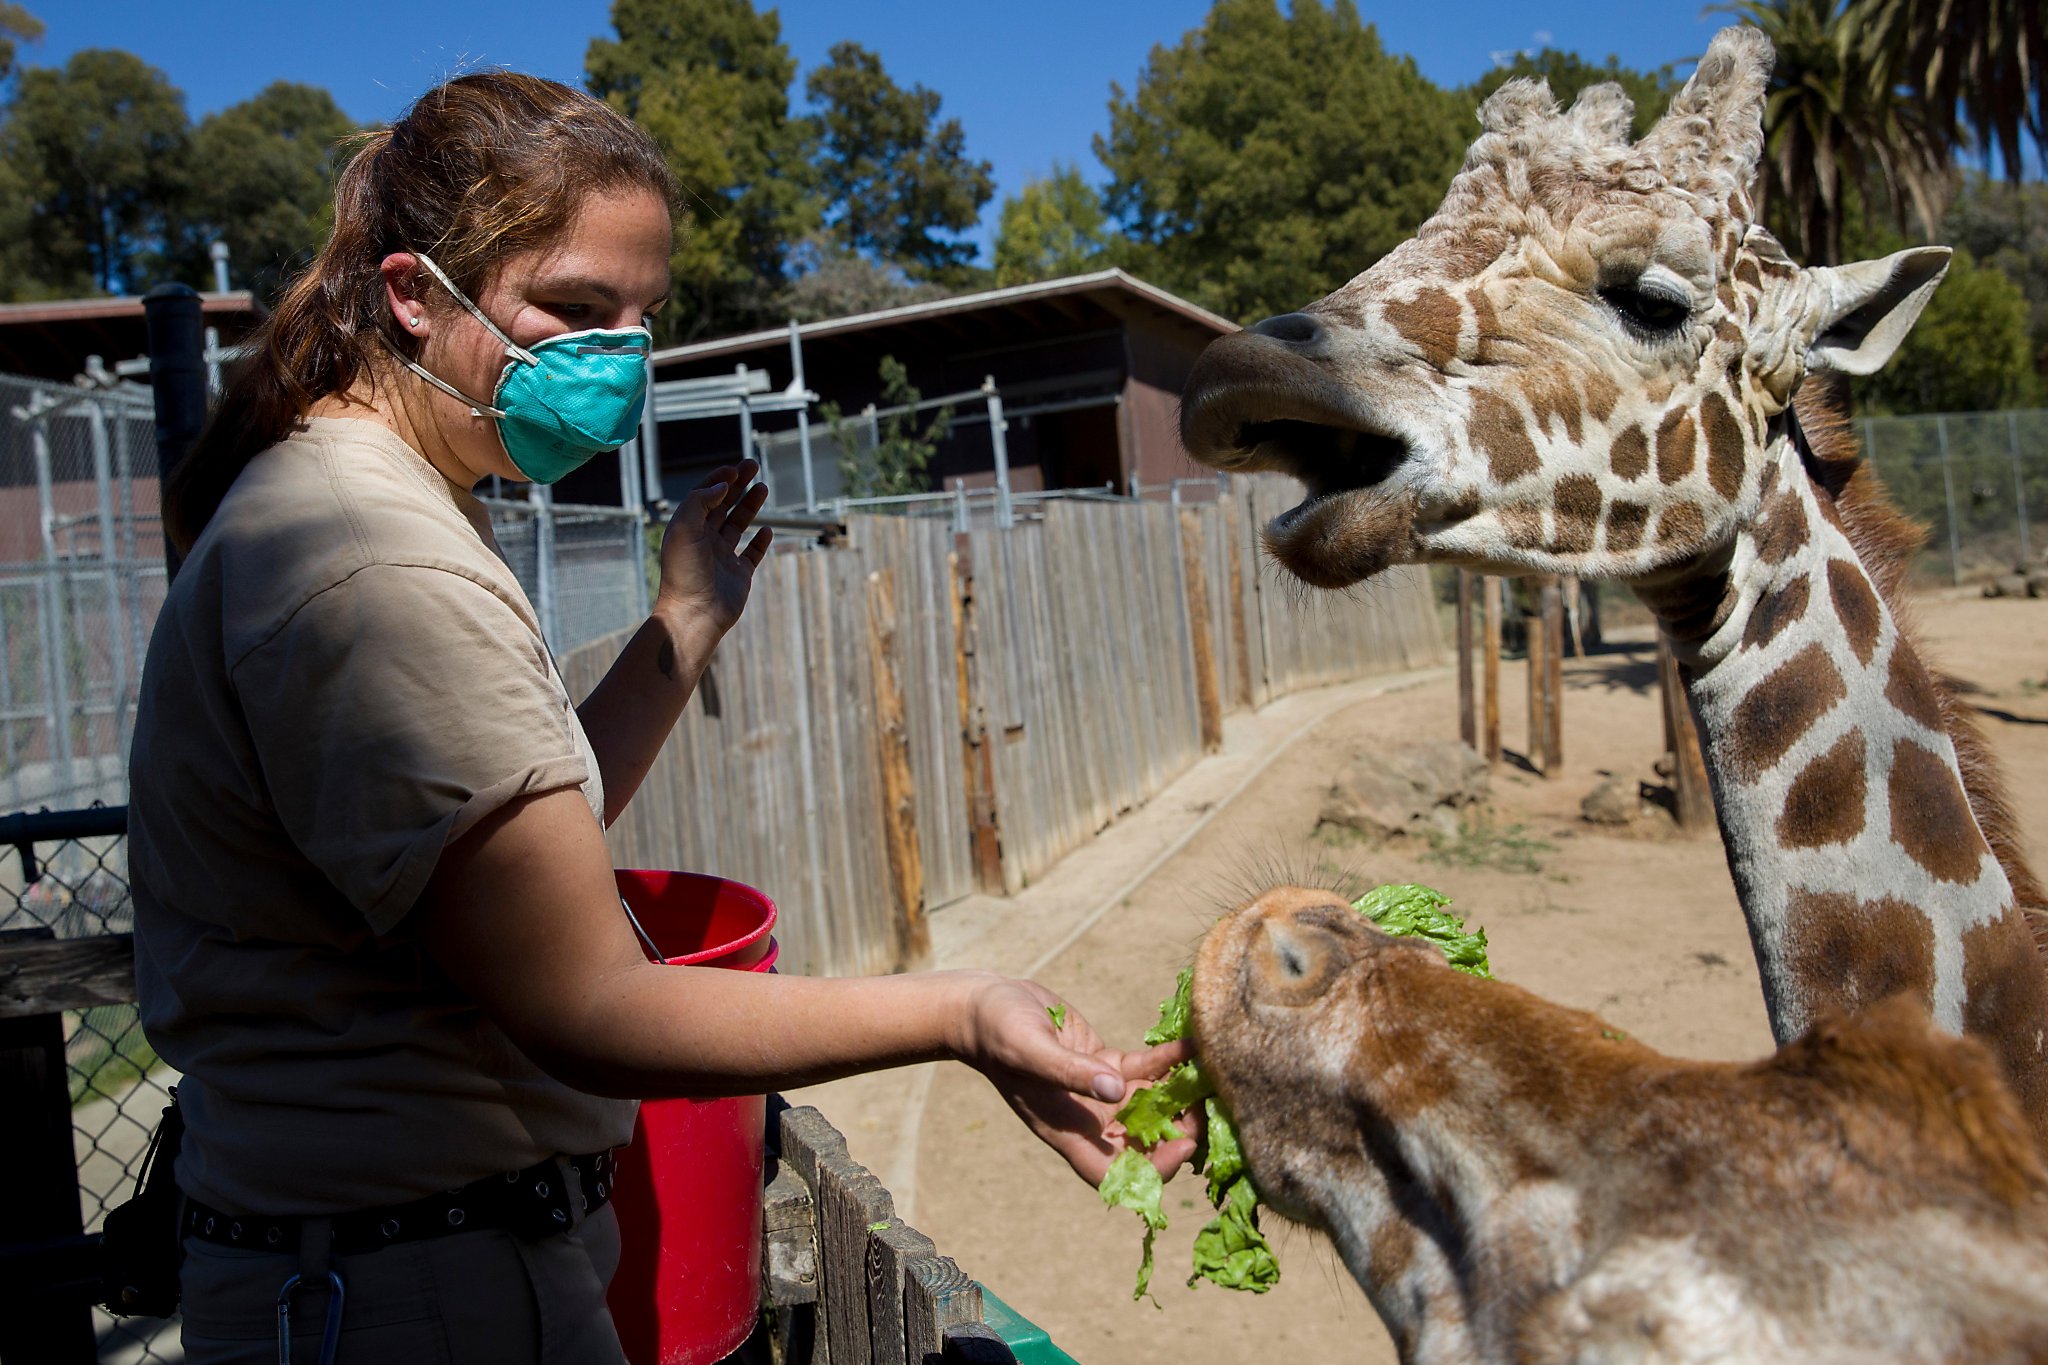 Oakland Zoo gets OK to reopen ‘This gives us a chance to survive’